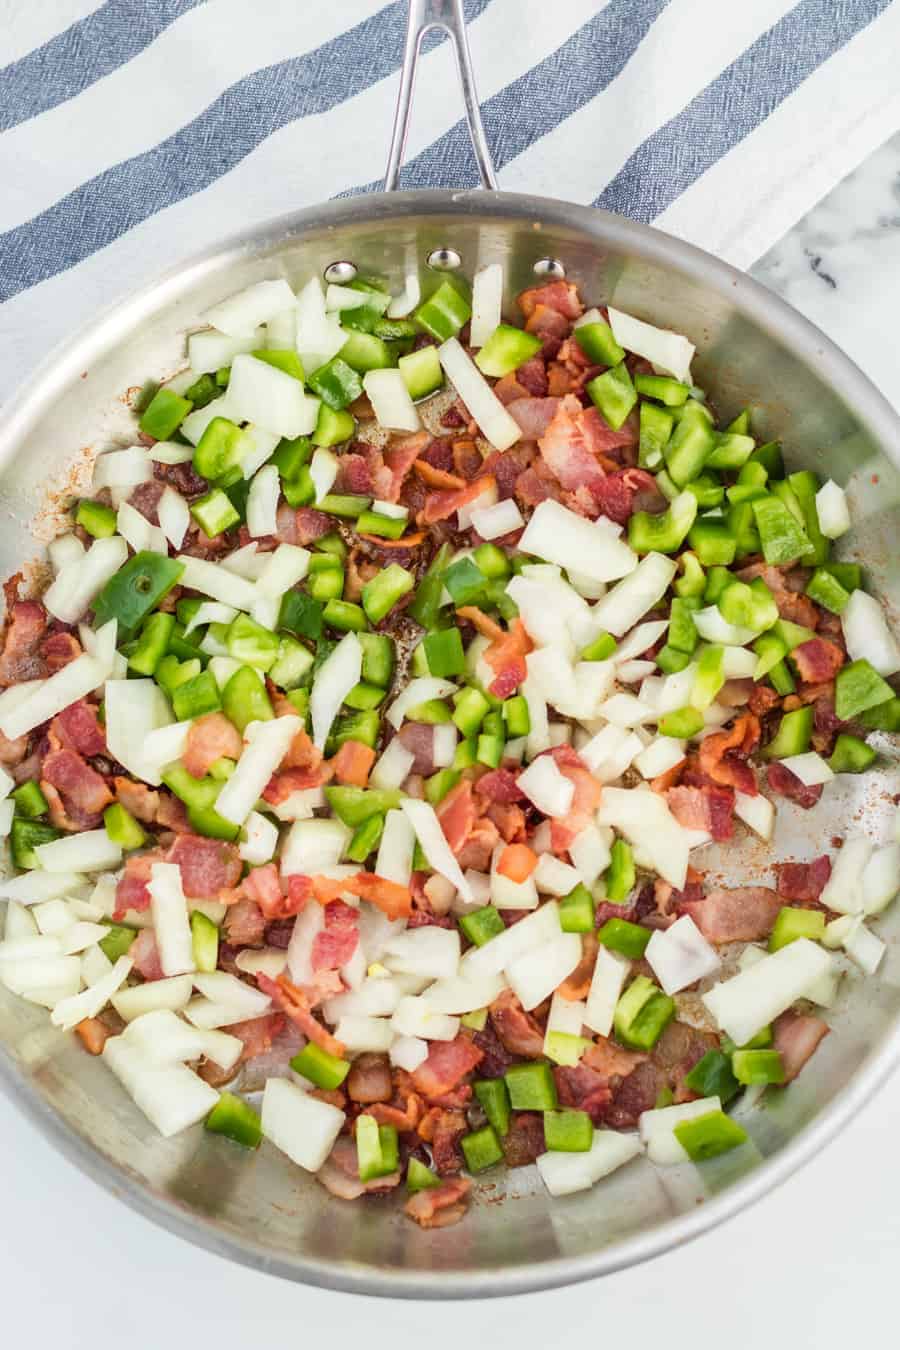 Stainless steel skillet with cooked bacon and chopped onion and green bell pepper ready to cook into a pasta sauce.